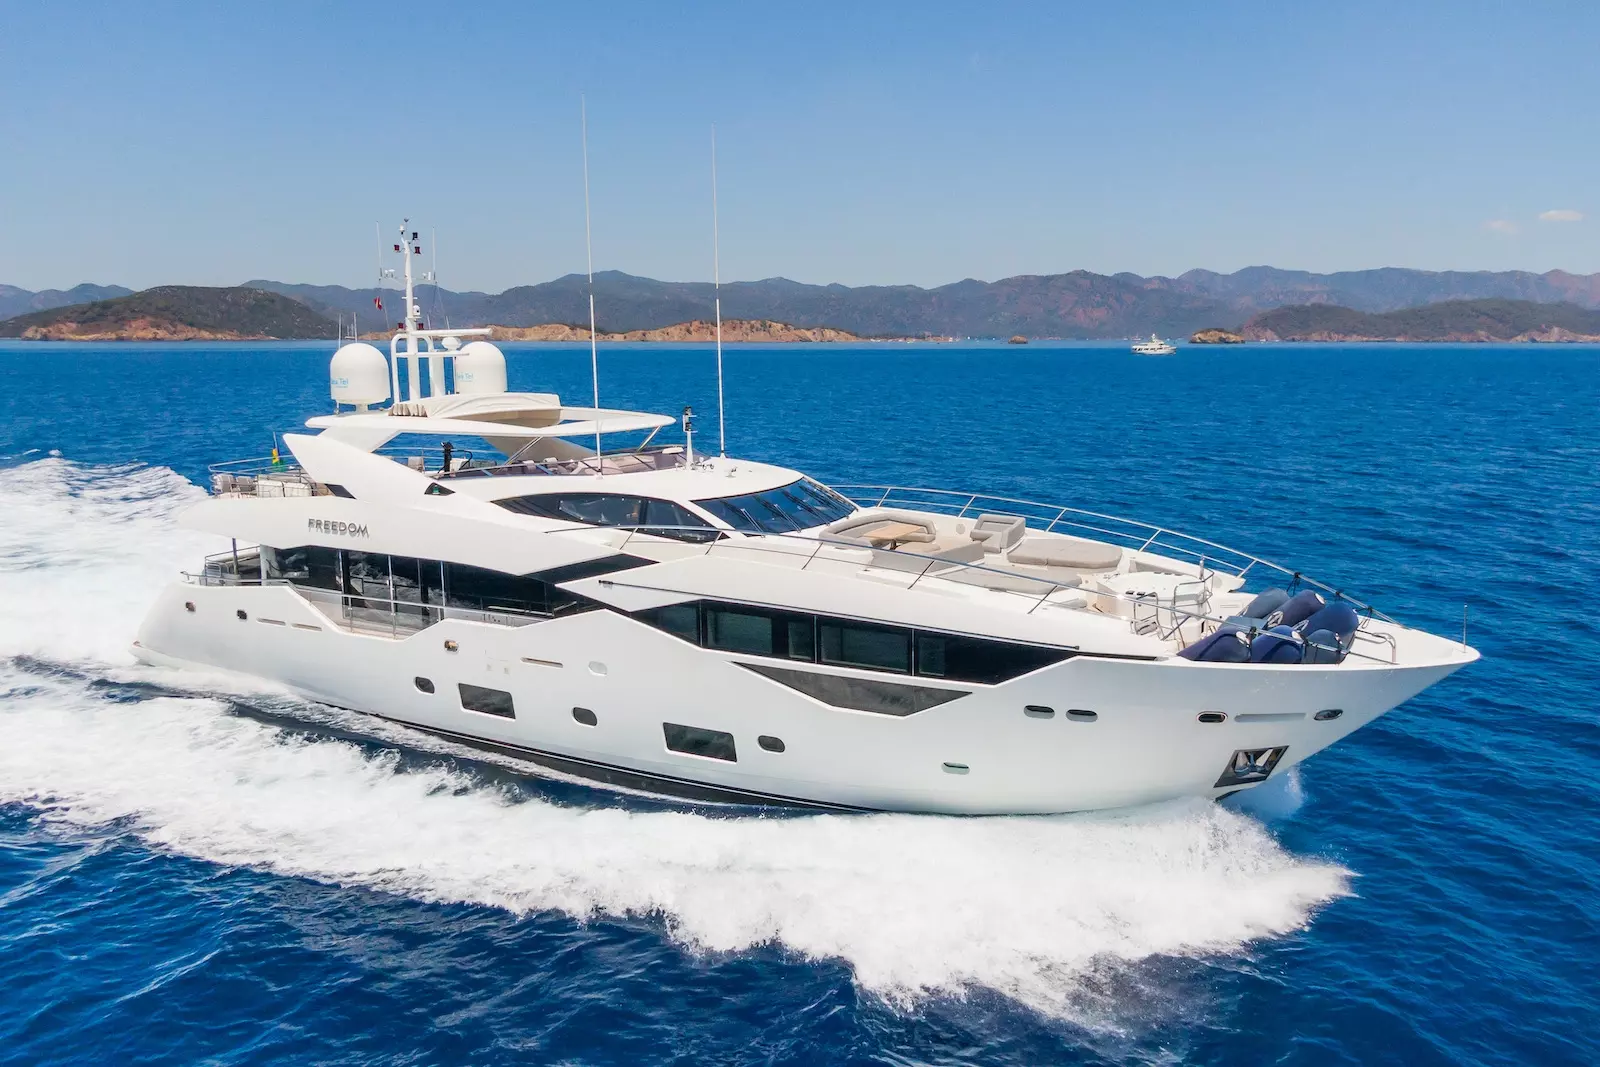 Freedom by Sunseeker - Special Offer for a private Superyacht Charter in Zakynthos with a crew